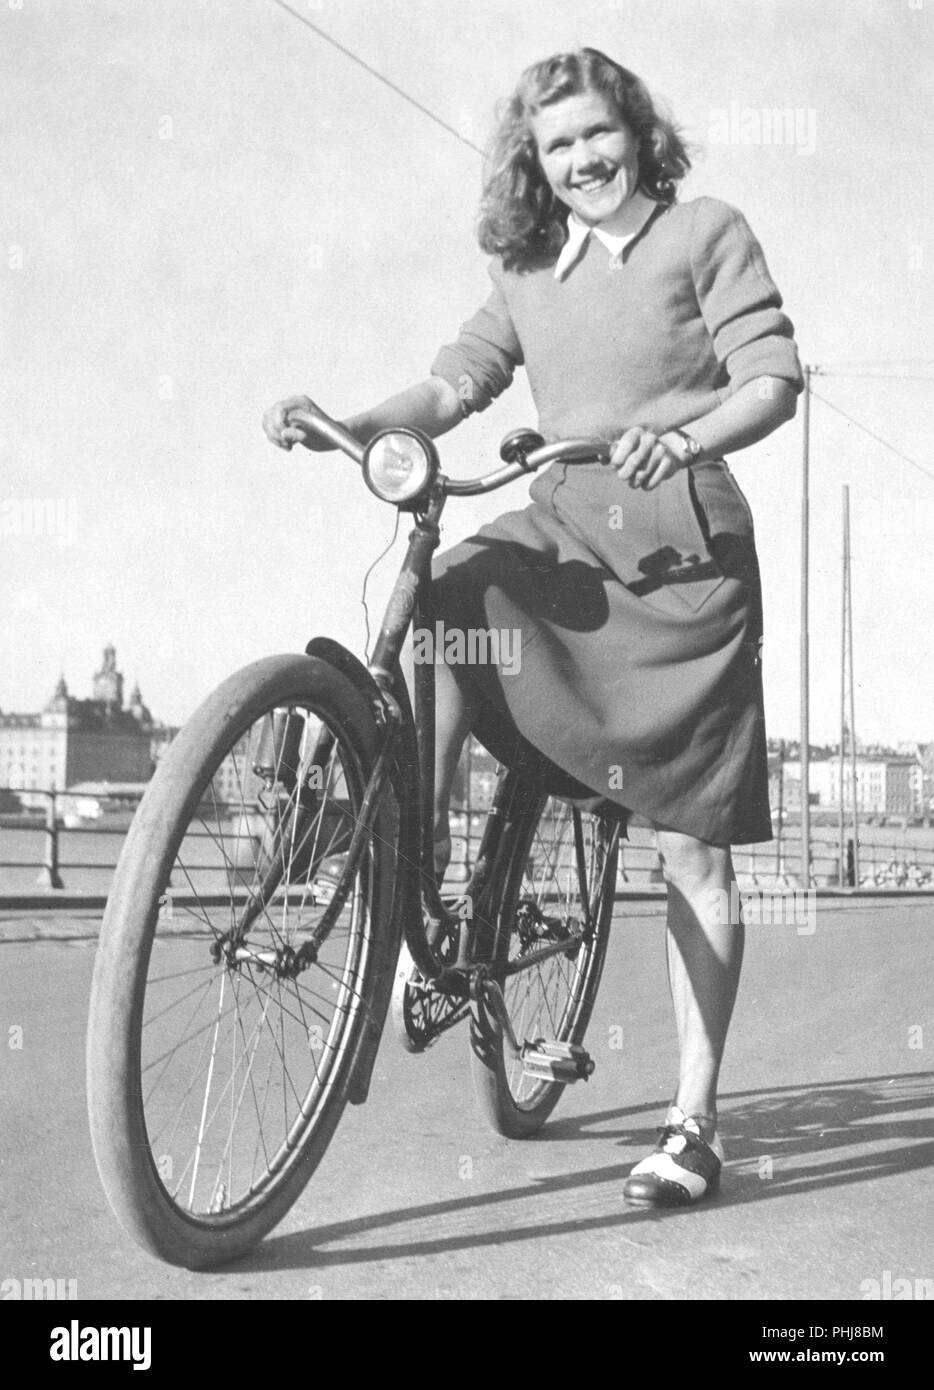 1940s woman on a bicycle. A smiling young woman on a womens bicycle on a sunny day. Swedish runner Anna Larsson. 1922-2003. Holder of four world records.  Sweden 1940s Stock Photo